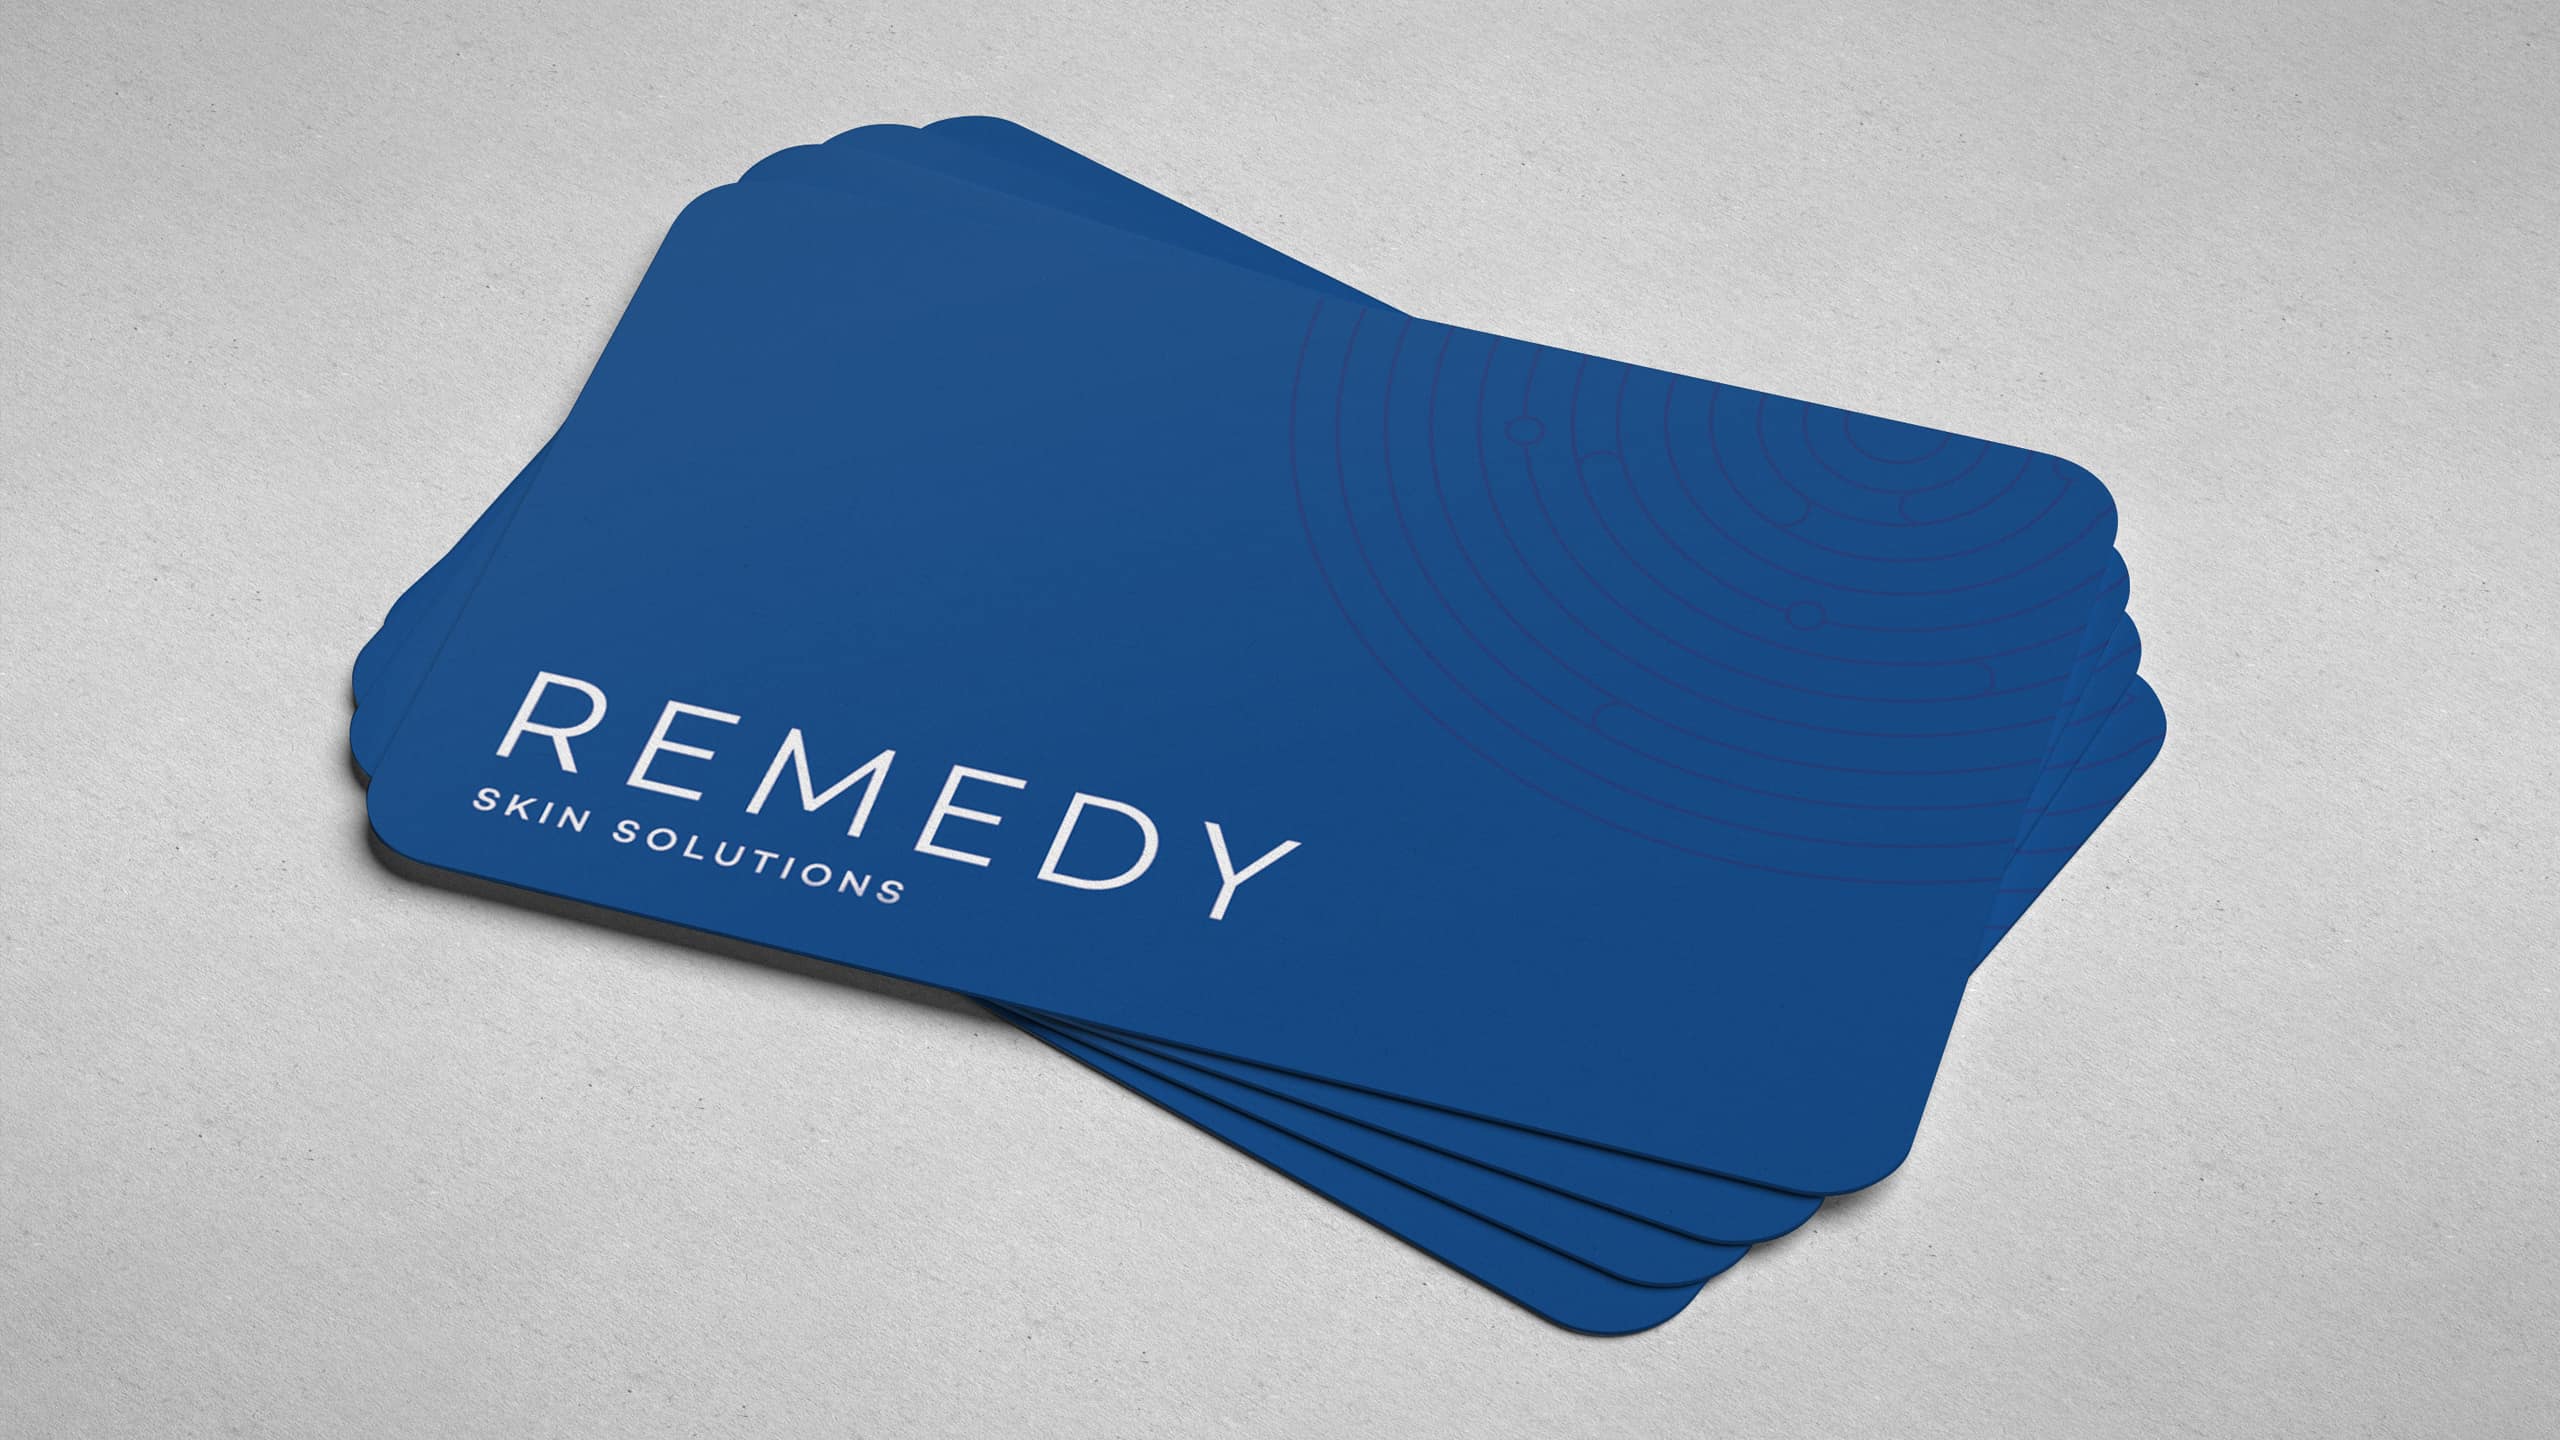 Blue branded business card for dermatology clinic and brand Remedy Skin Solutions